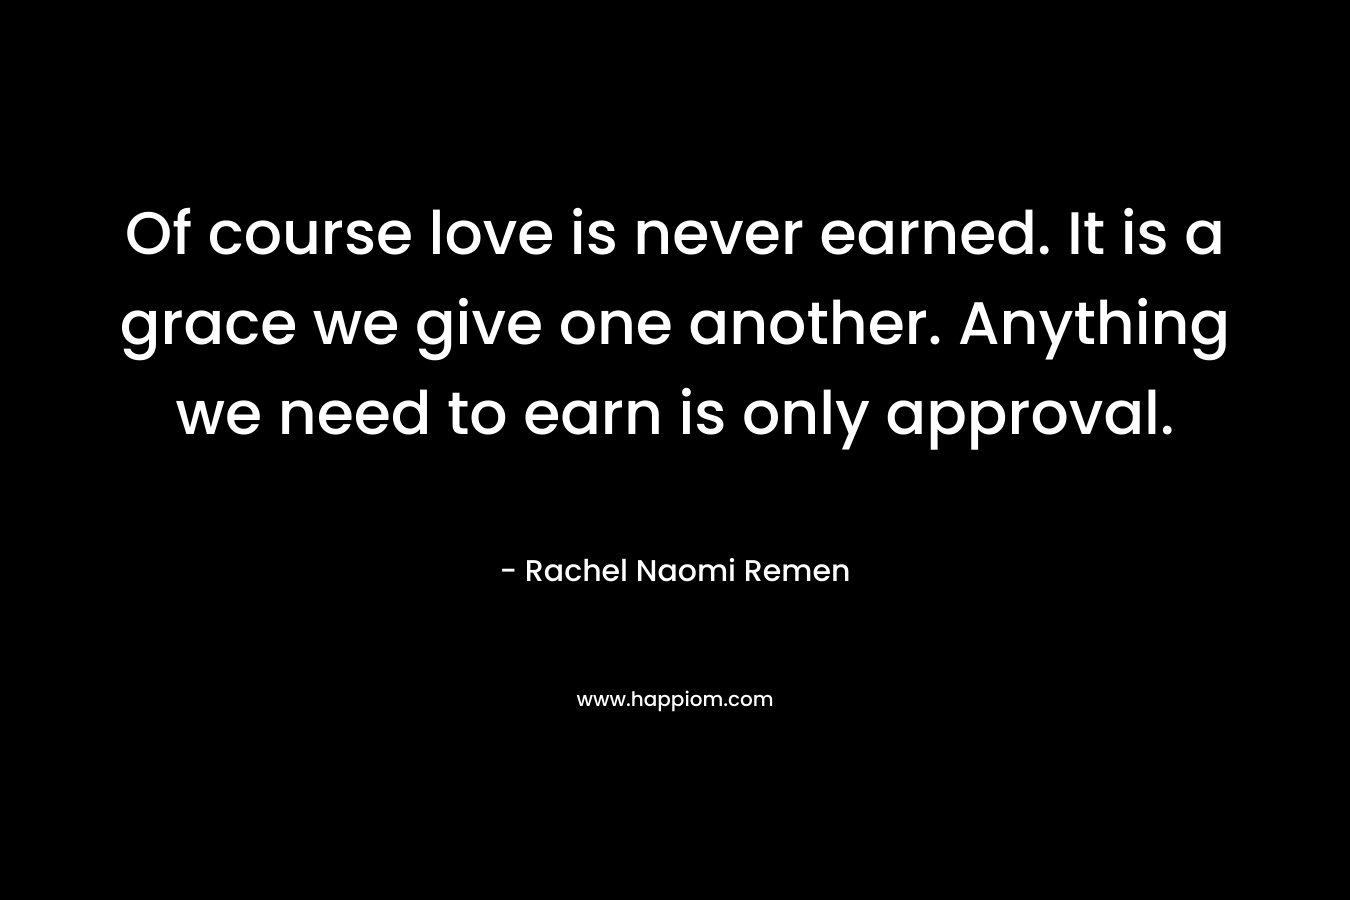 Of course love is never earned. It is a grace we give one another. Anything we need to earn is only approval. – Rachel Naomi Remen